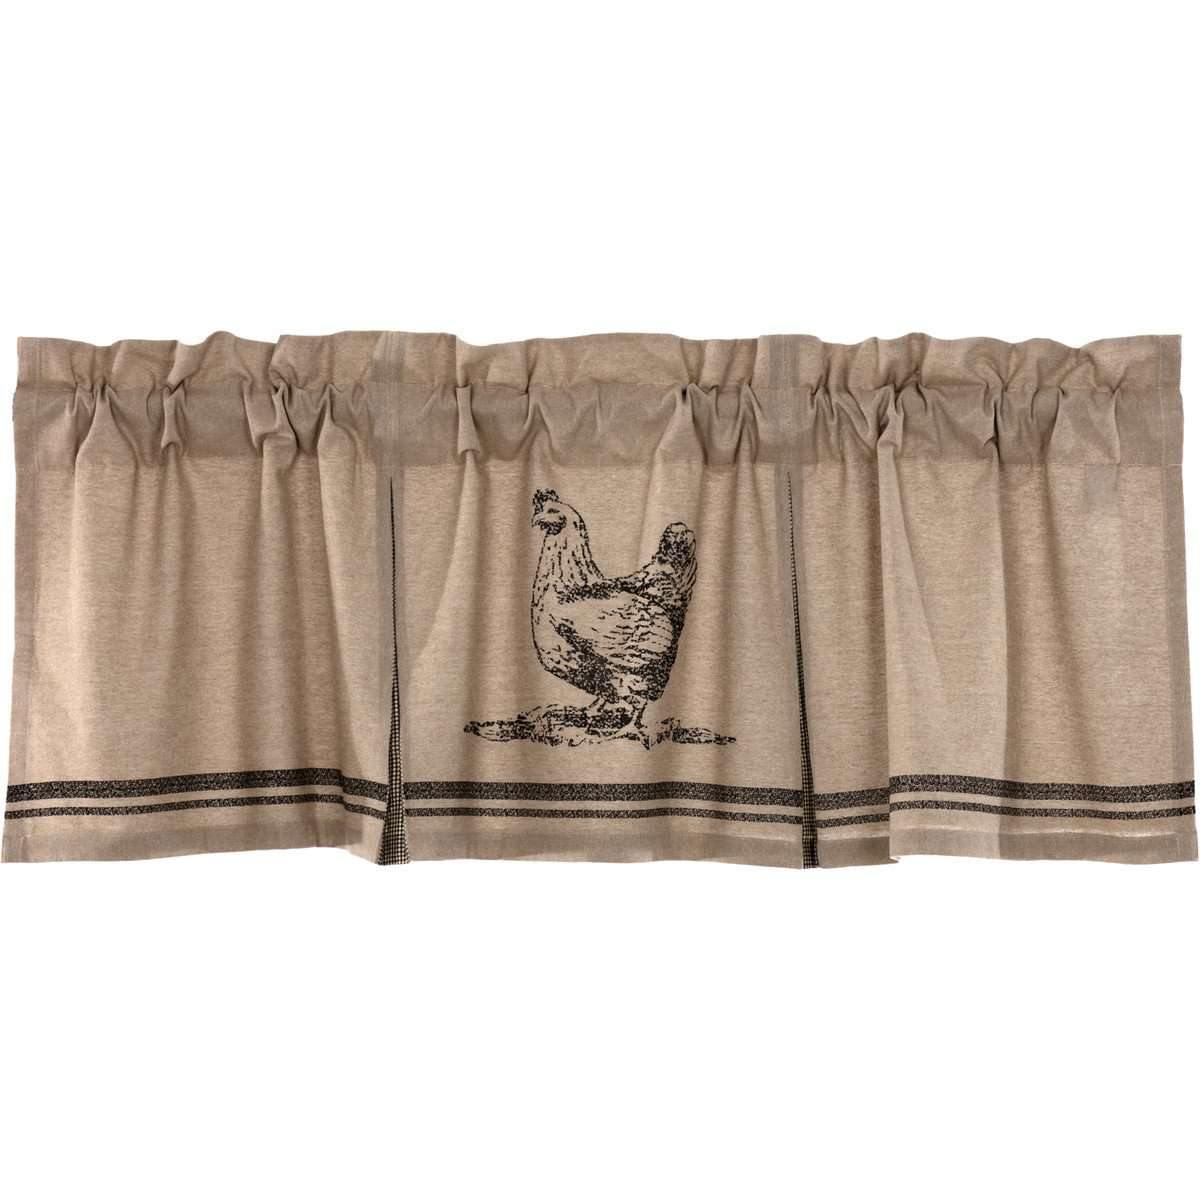 Sawyer Mill Charcoal Chicken Valance Pleated Curtain 20x60 VHC Brands - The Fox Decor